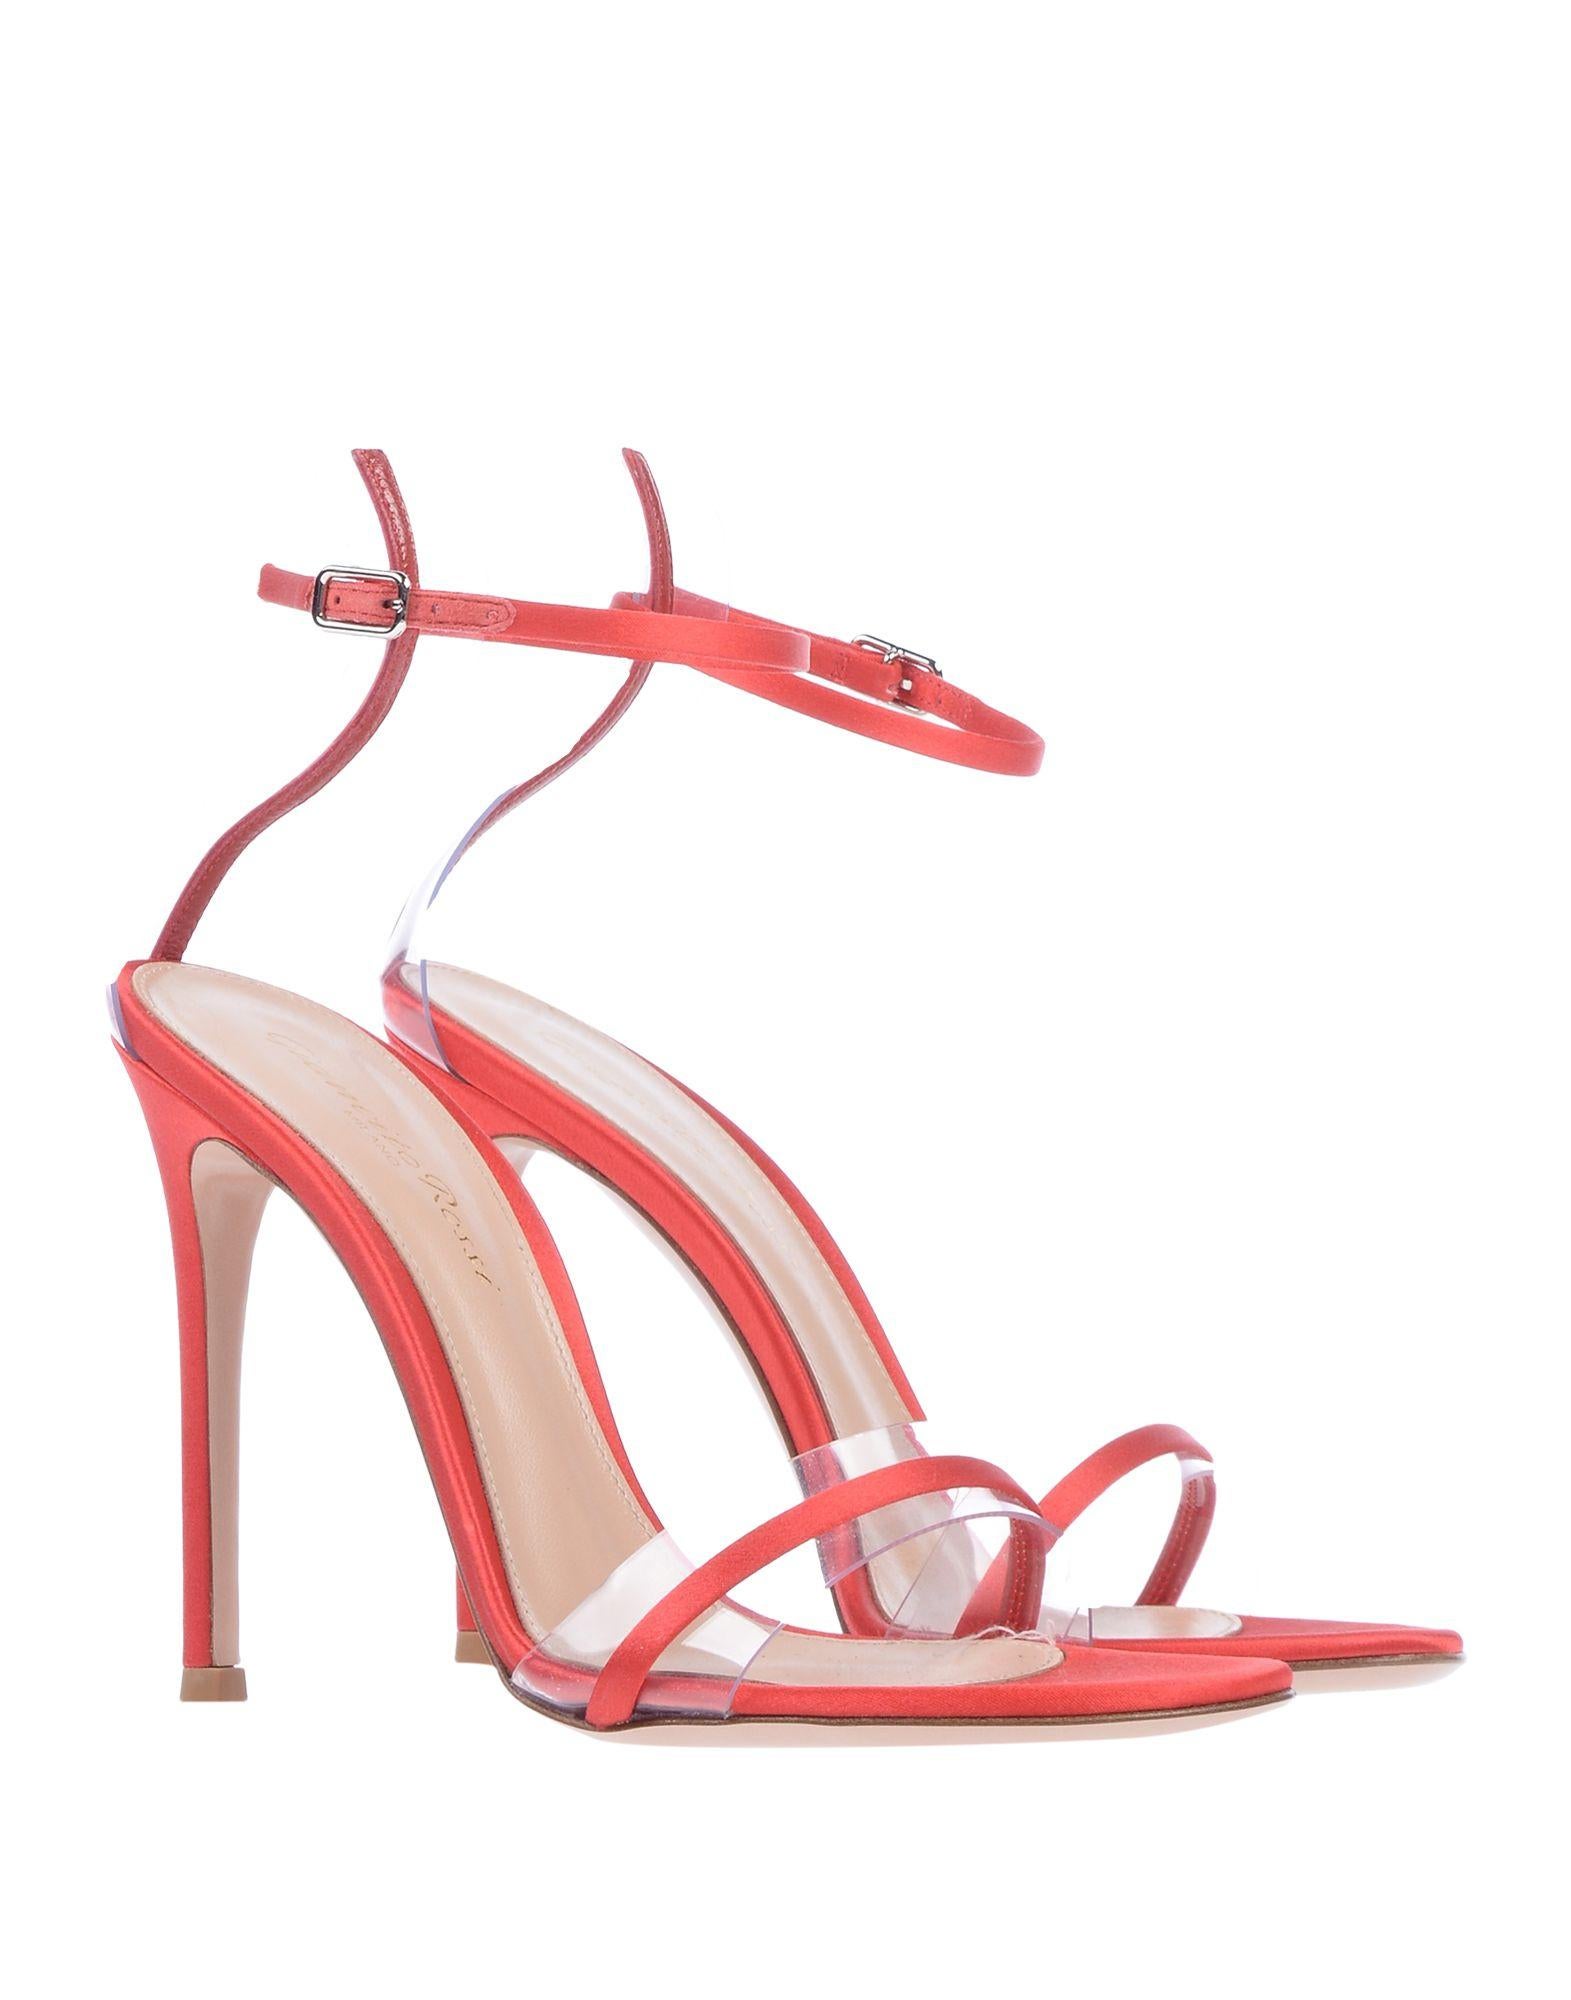 Pink Gianvito Rossi NEW Red Satin Clear PVC Ankle Evening Sandals Heels in Box